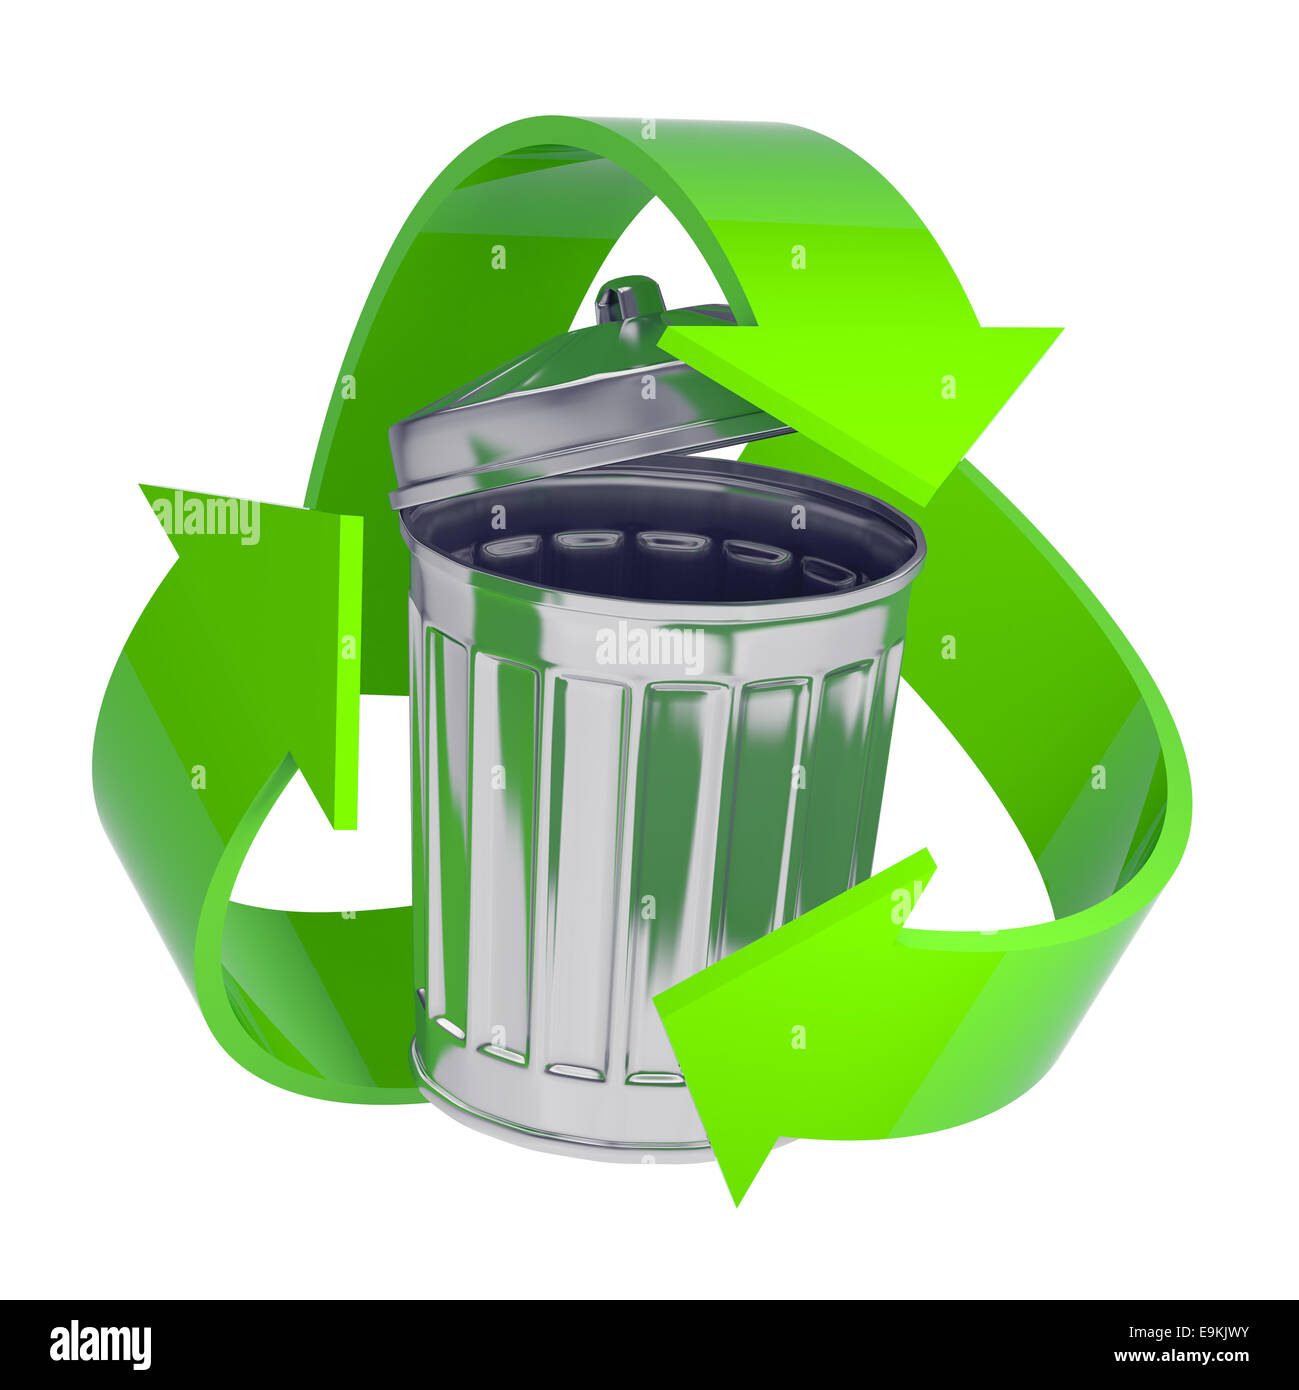 3d render of a galvanized steel rubbish bin surrounded by a green recycle symbol Stock Photo